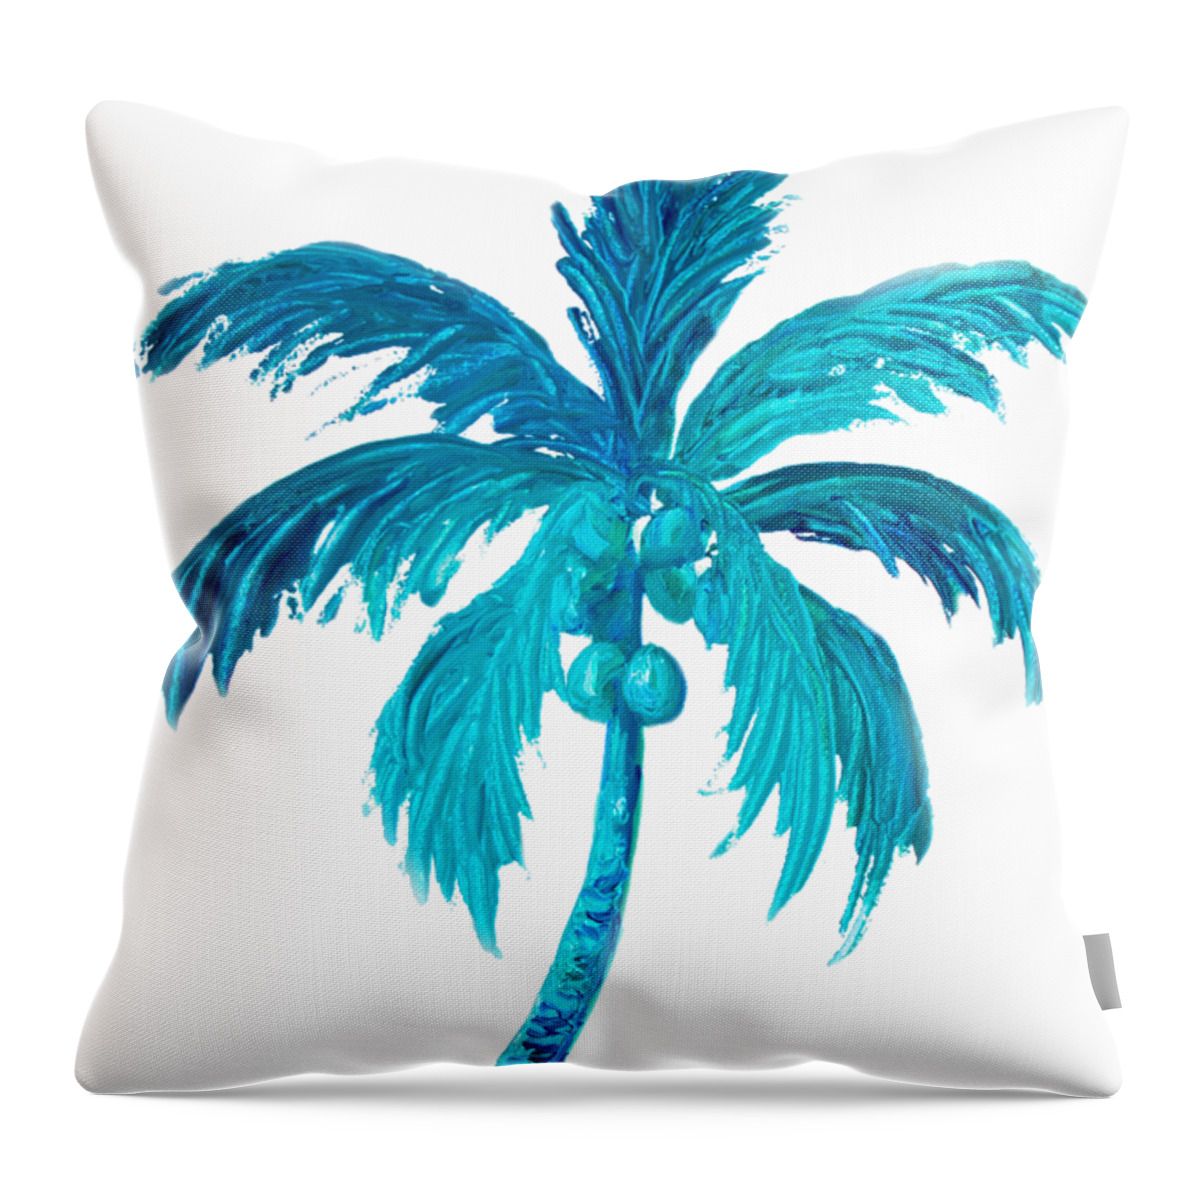 Coconut Palm Throw Pillow featuring the painting Coconut Palm Tree by Jan Matson